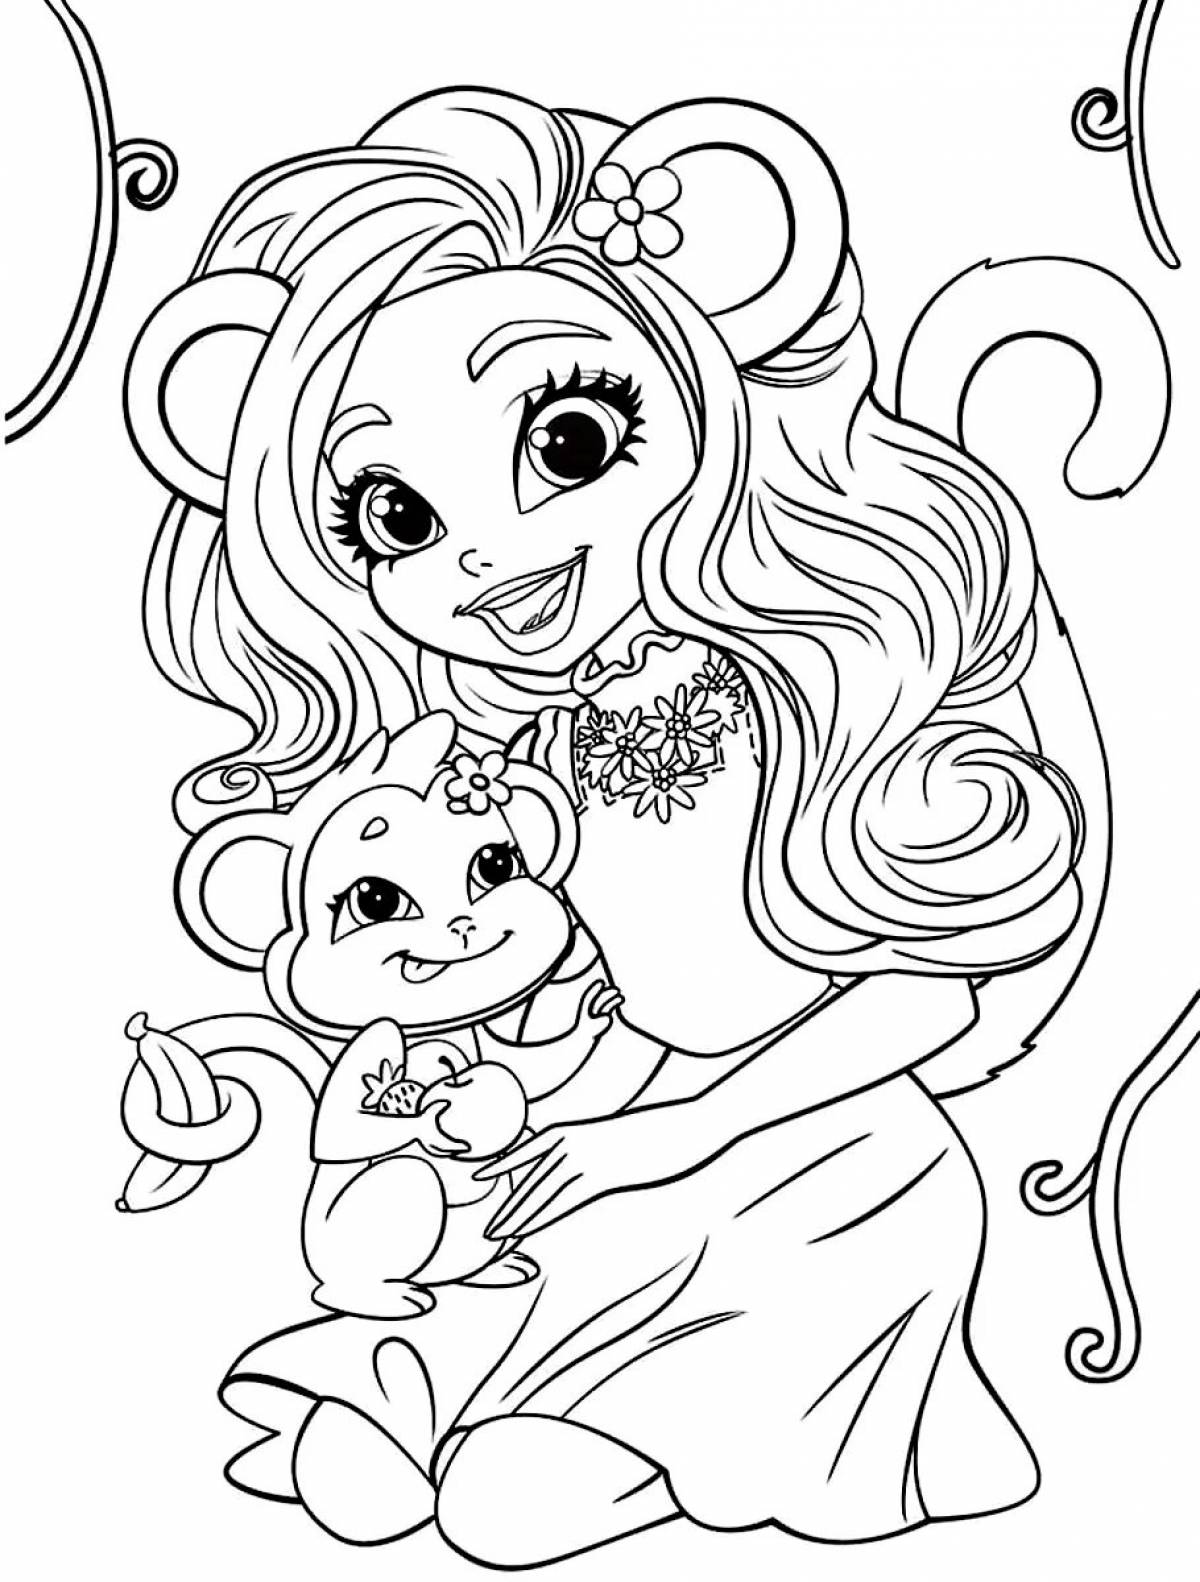 Entenchymal majestic coloring pages